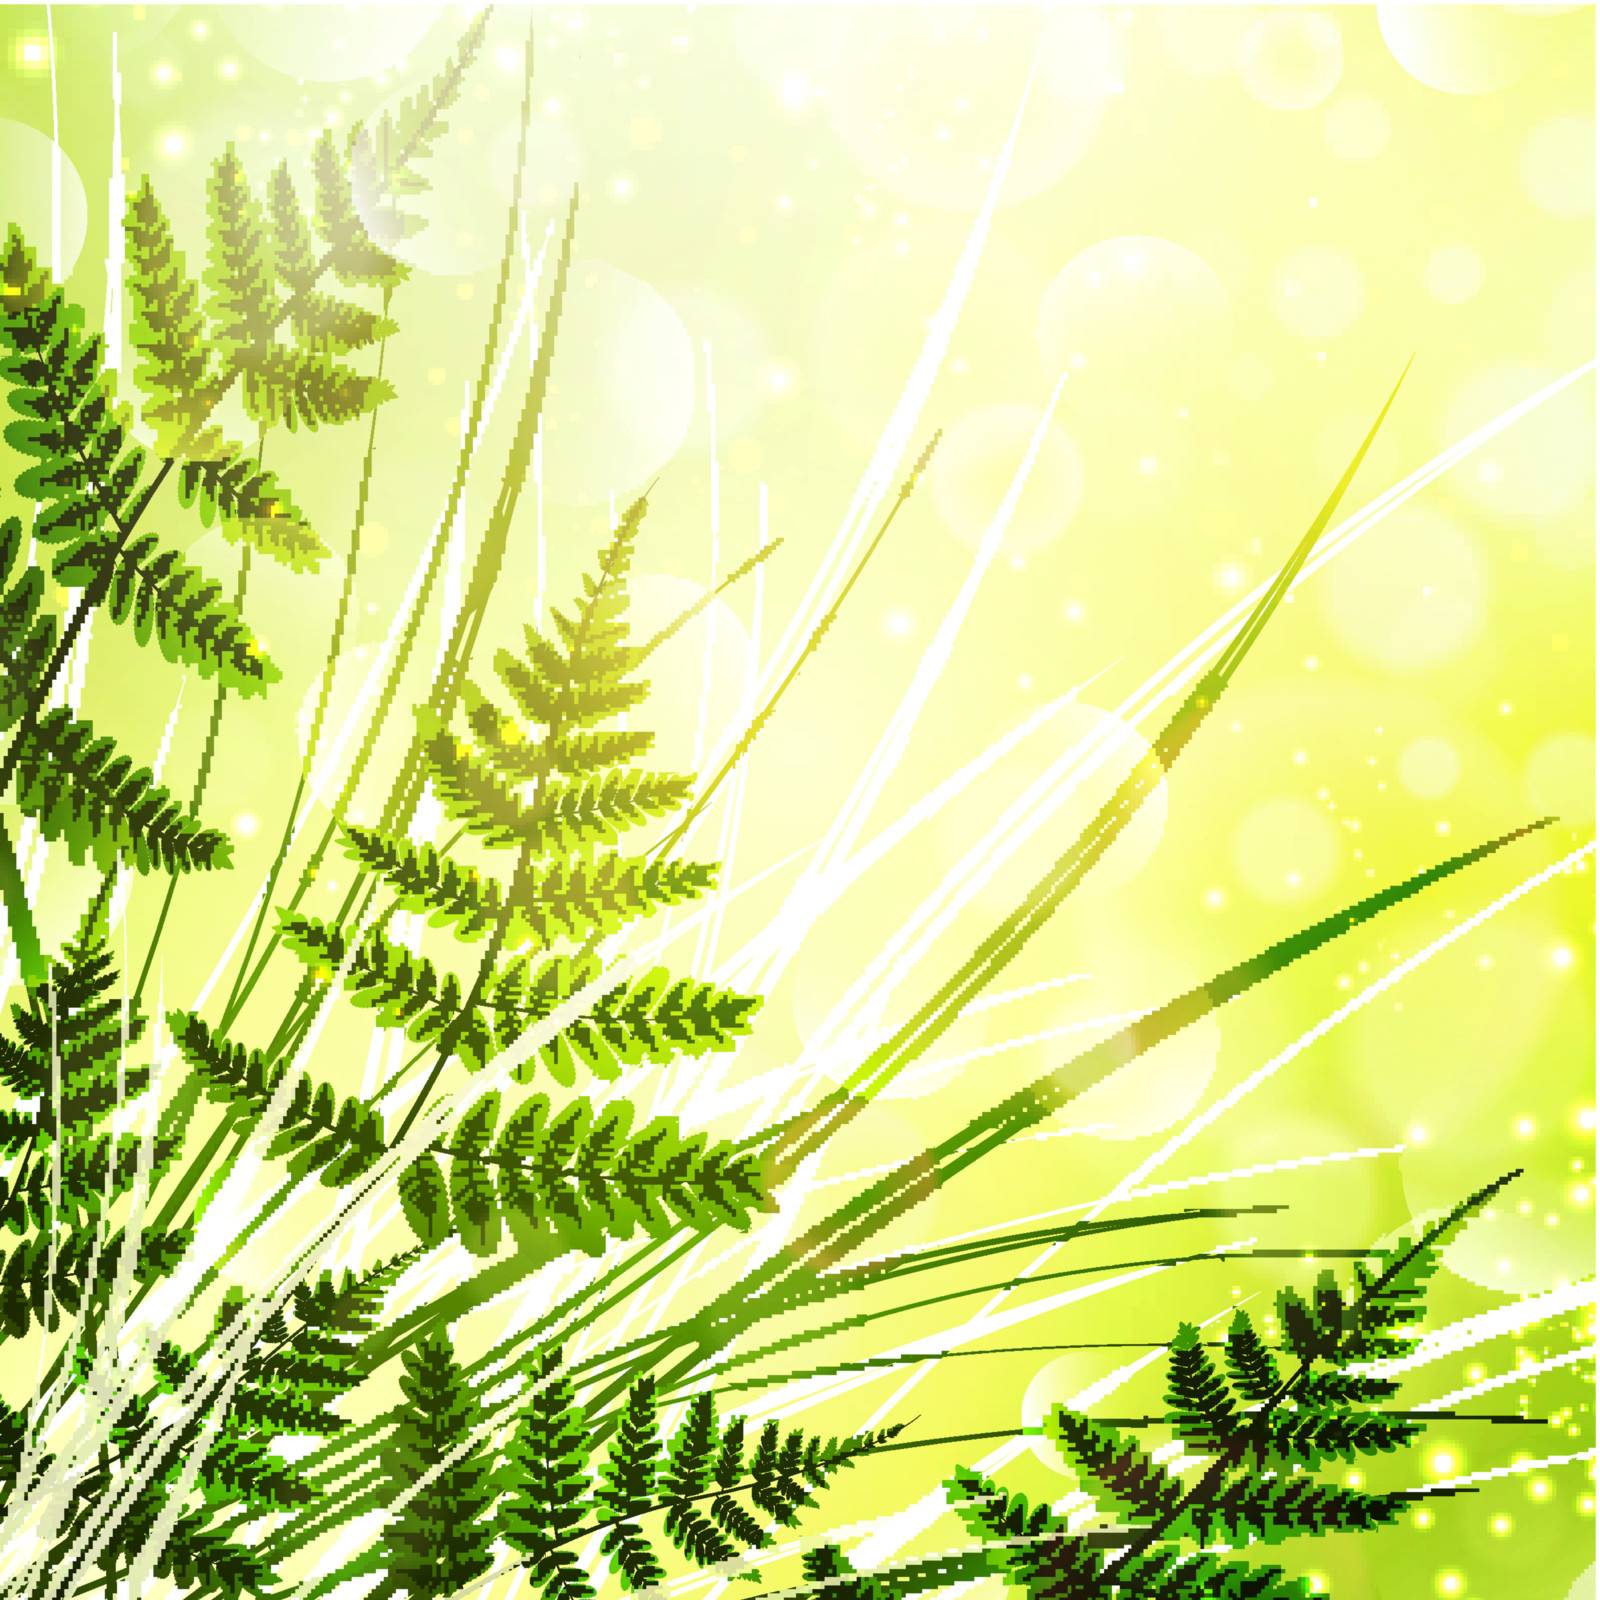 Green Fern Over Sunny Bright Background